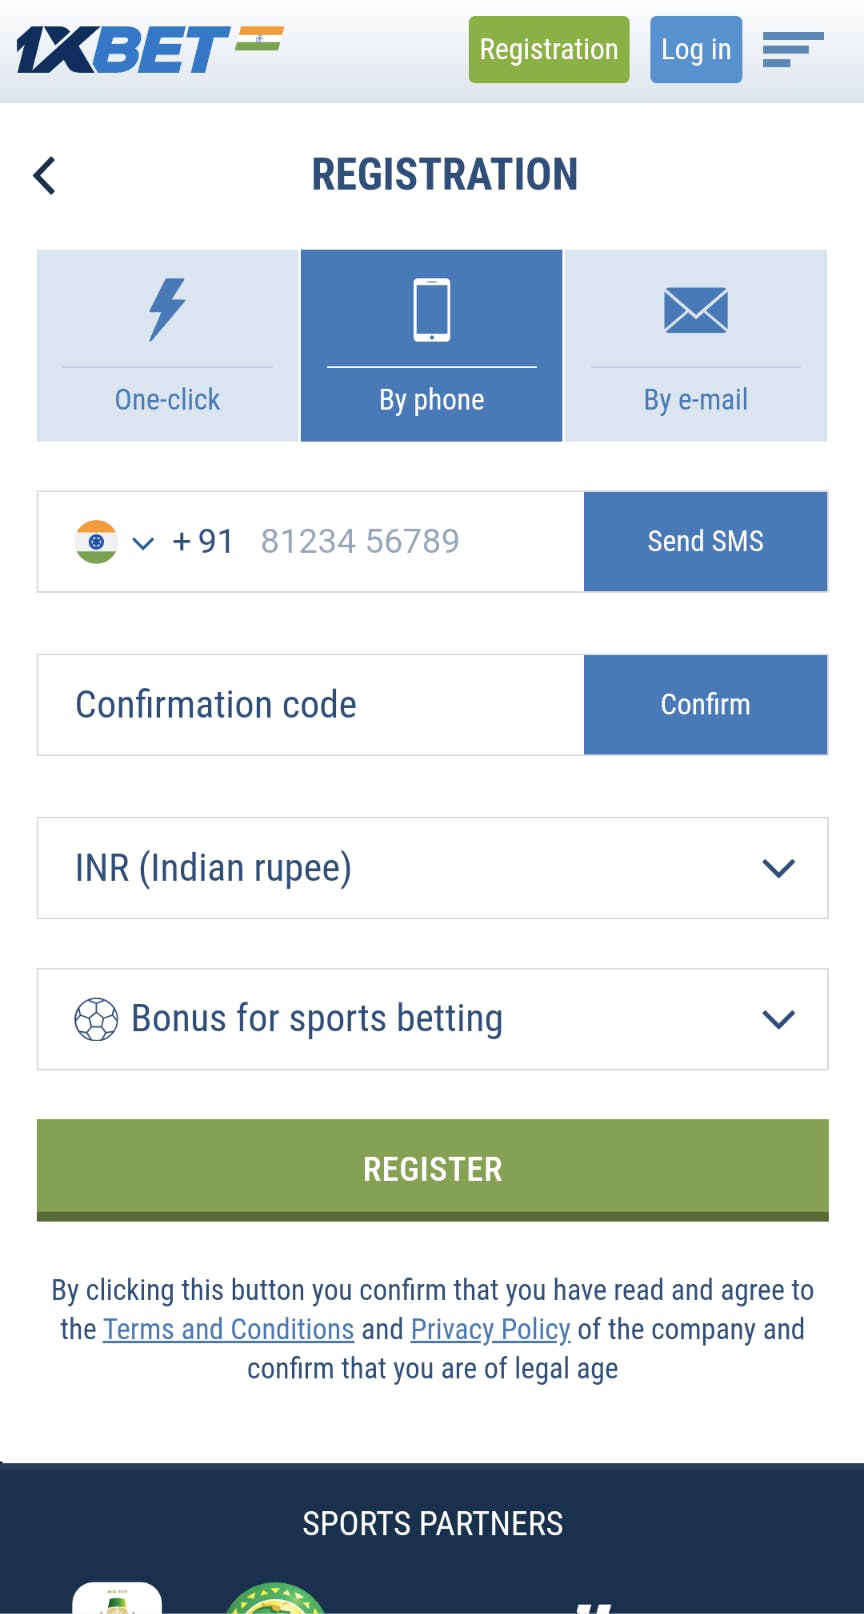 1xBet by phone registration on the app.